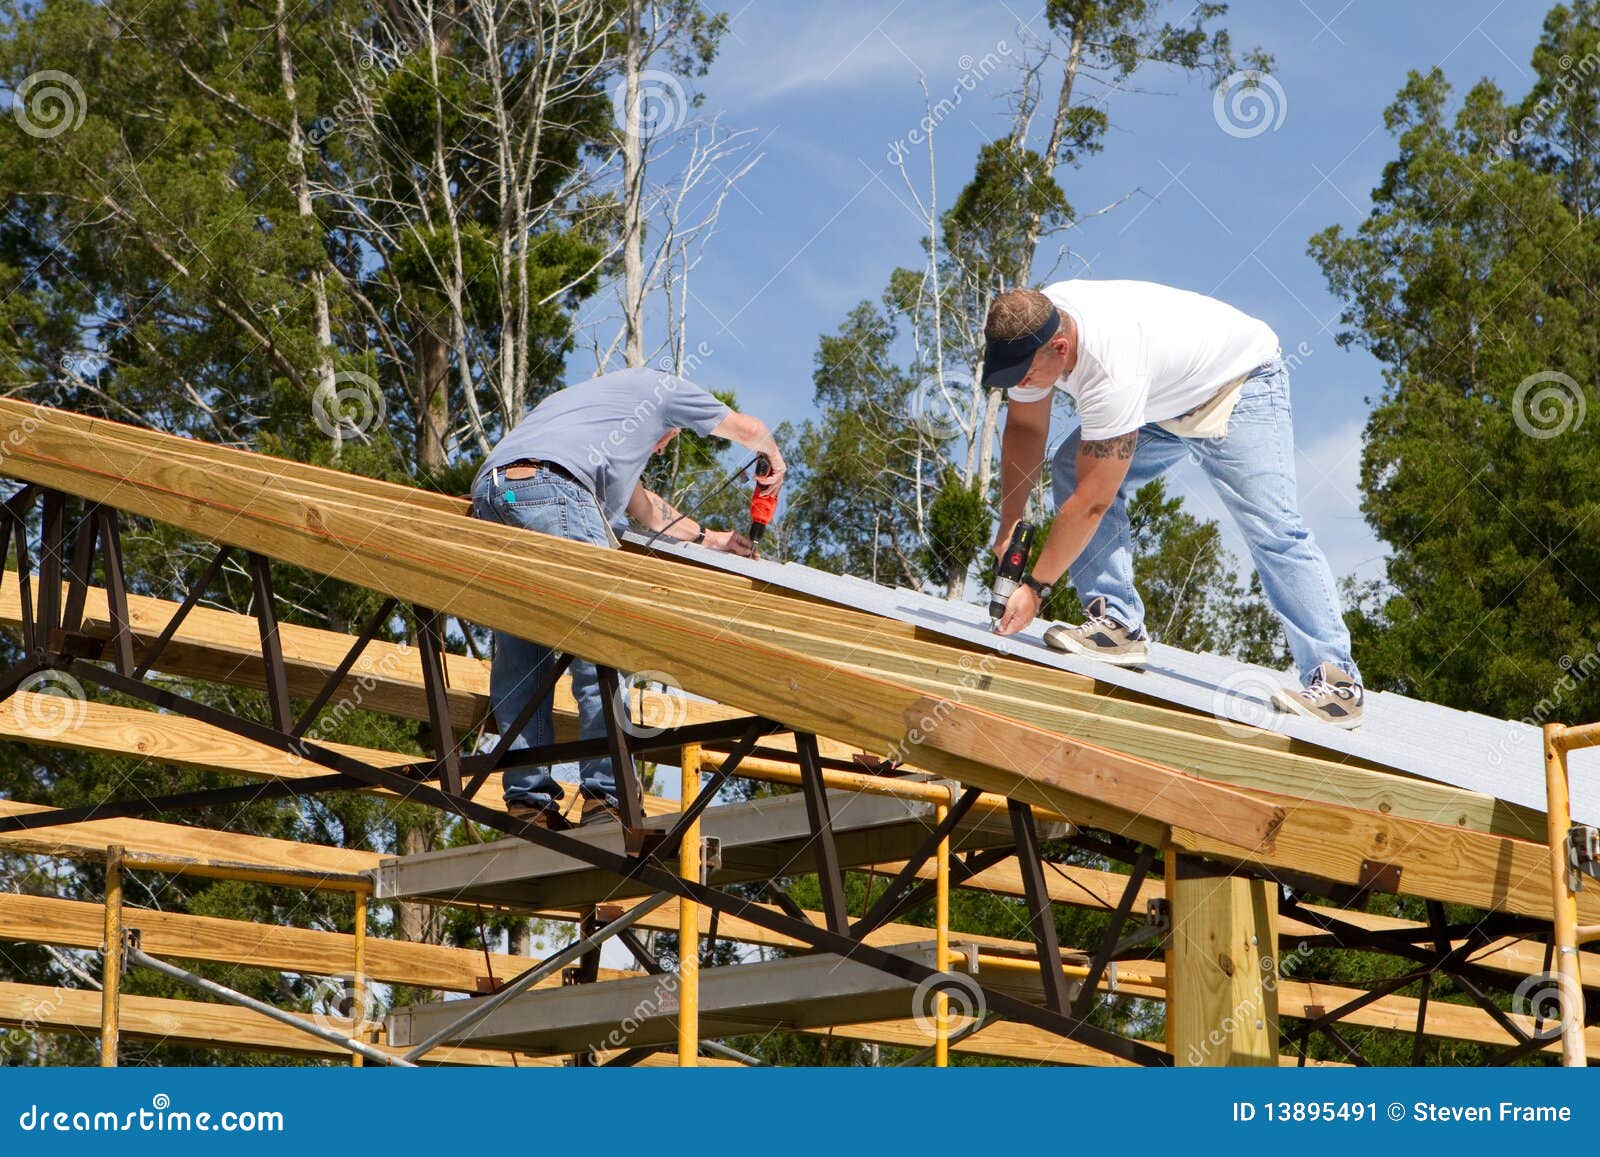 roofers fastening